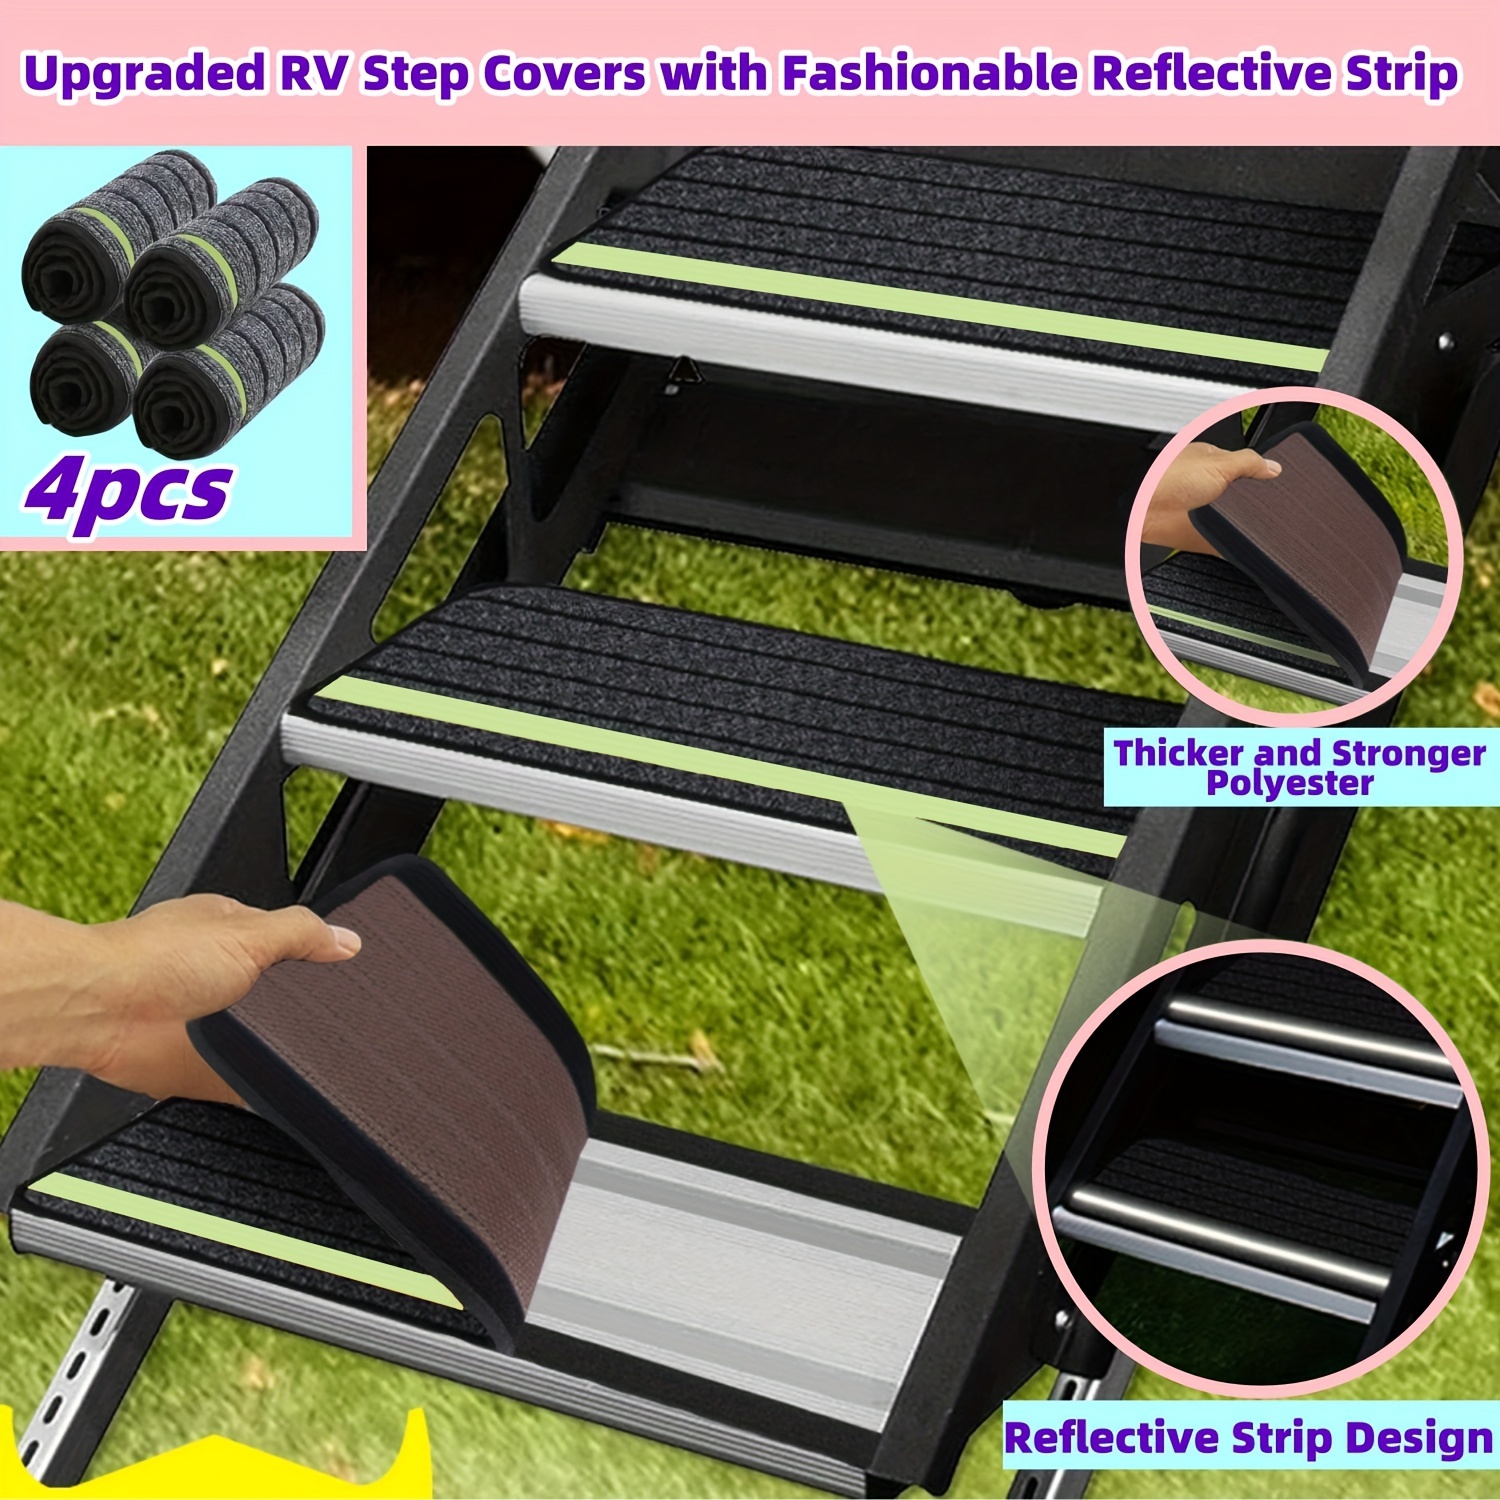 

Upgraded Rv Step Covers With Fashionable Reflective Strip, 4 Pack Camper Stair Cover Rug Carpet For Travel Trailers (black)